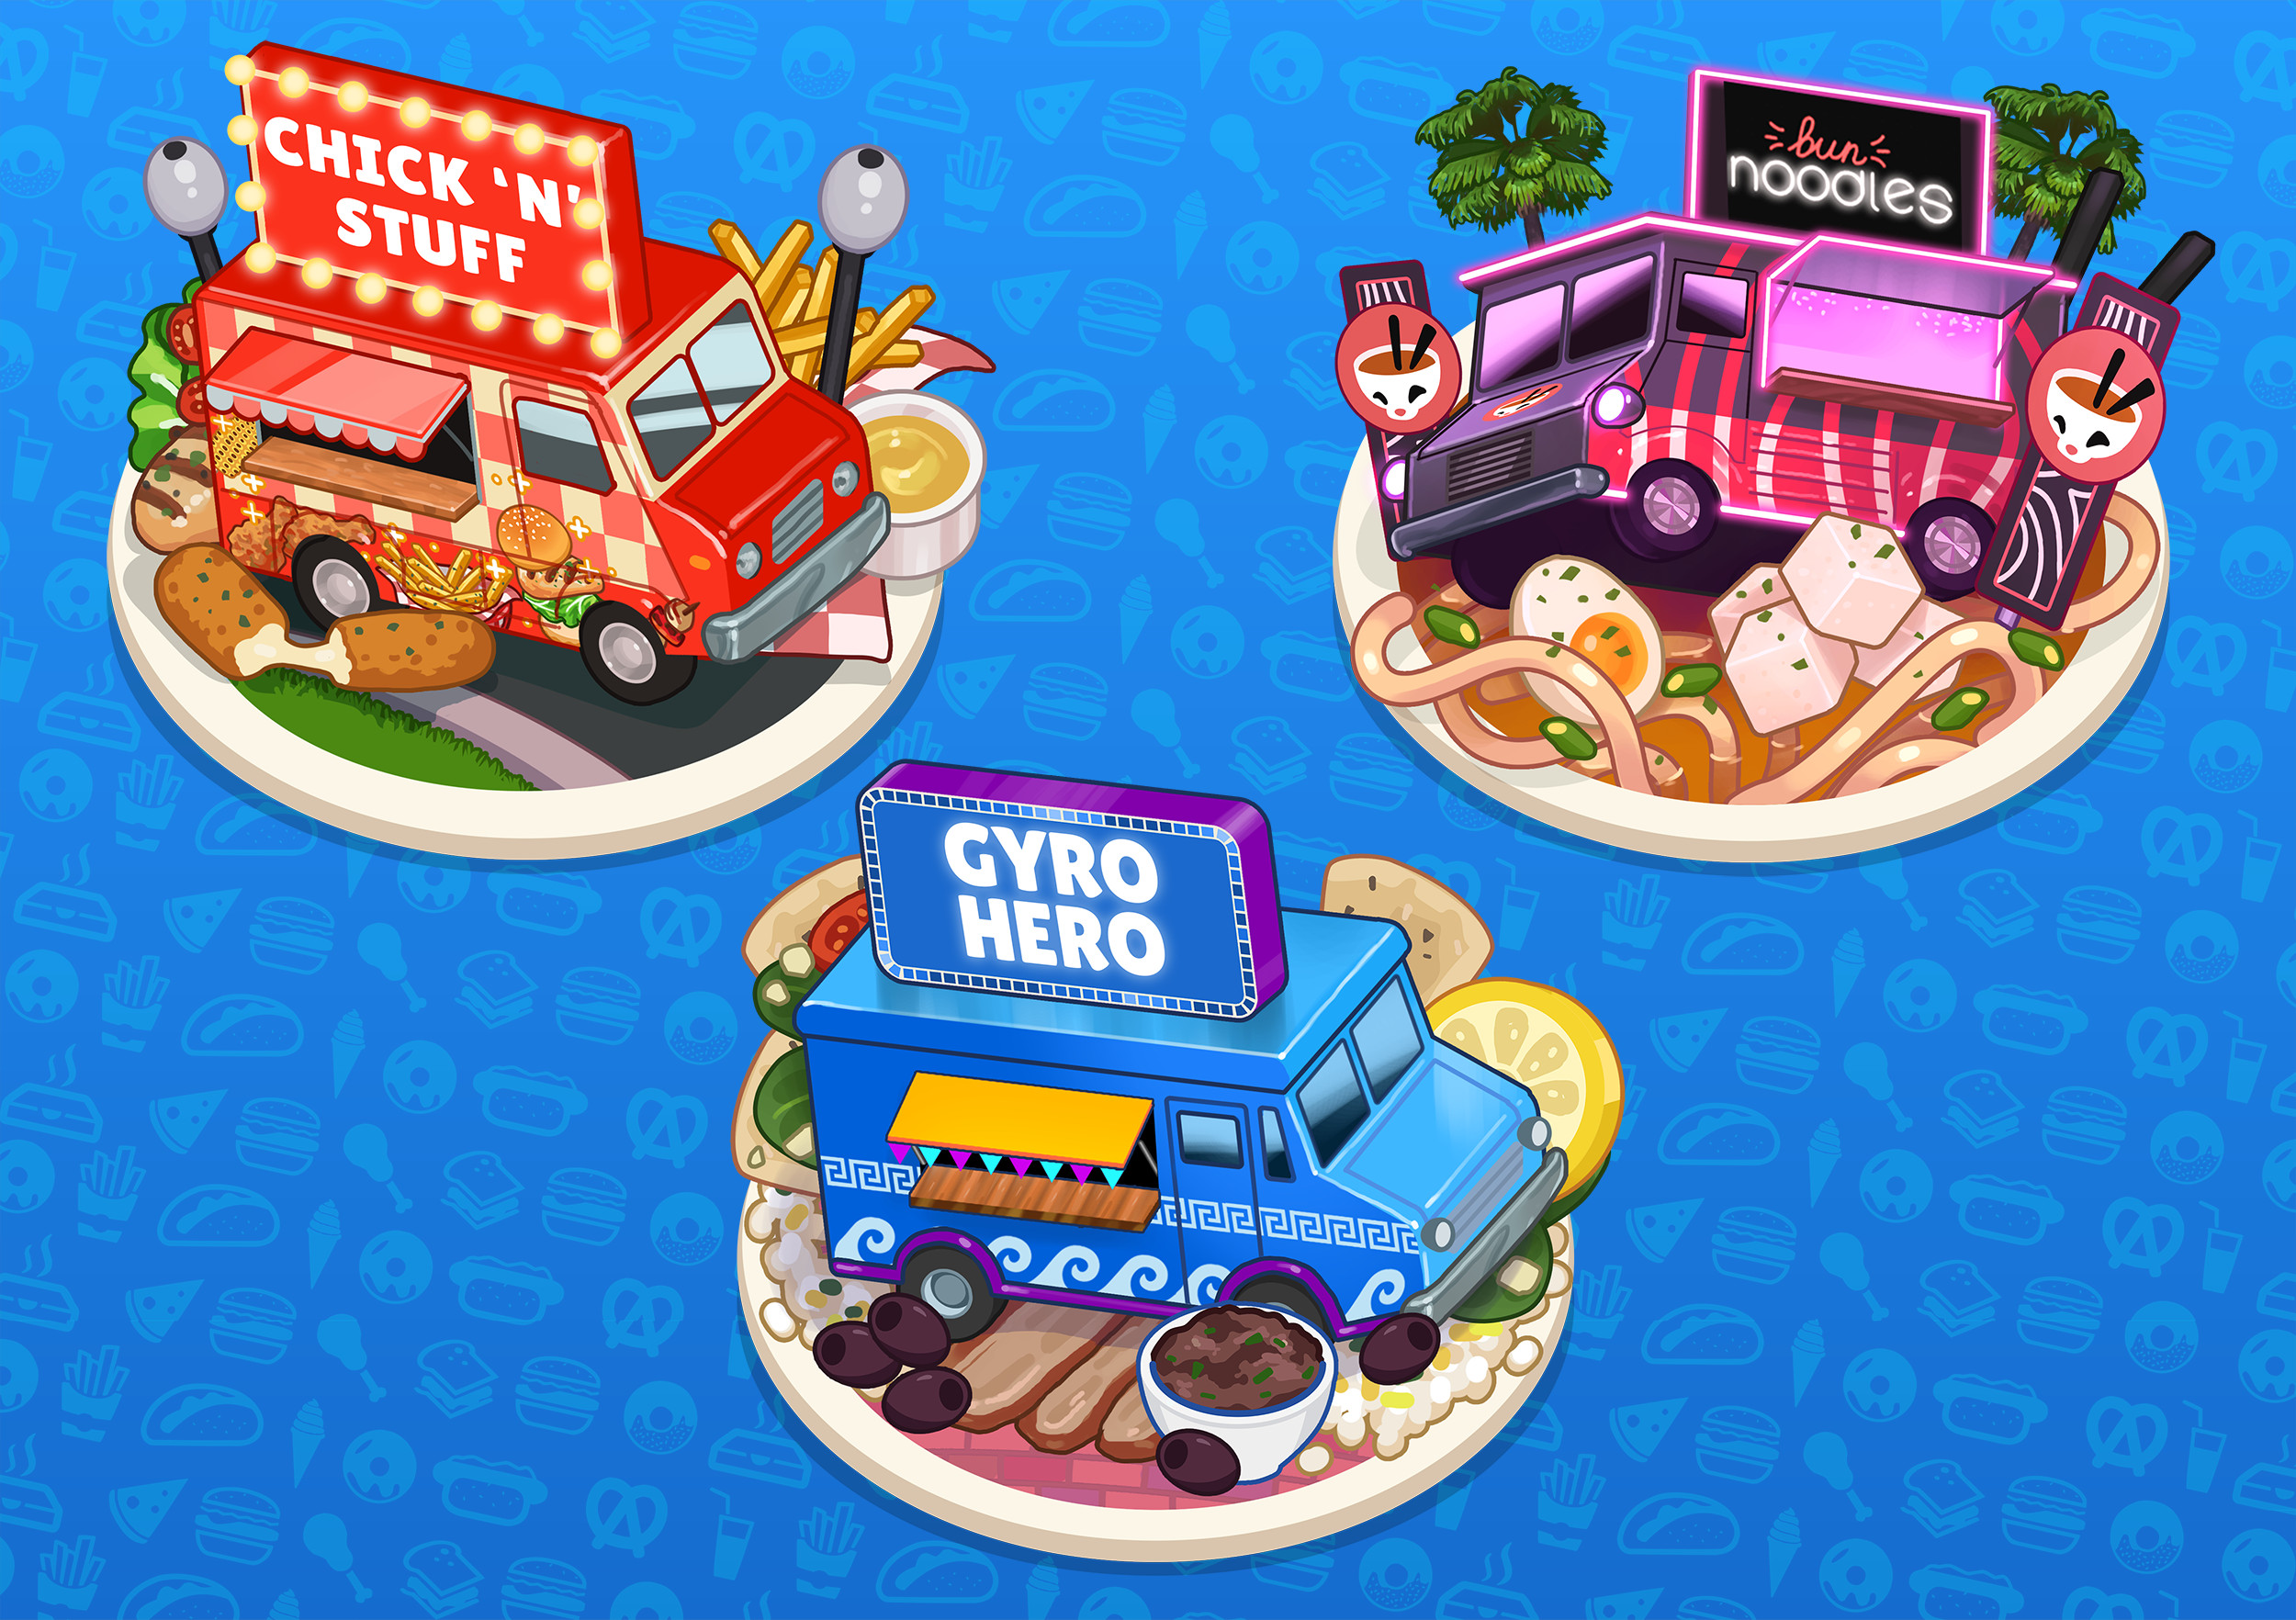 World Select Logos

Each world was themed after a different cuisine and had a corresponding food truck associated with it. The world select trucks were standalone illustrations showing off the trucks and food of that specific world.

Truck art by me.